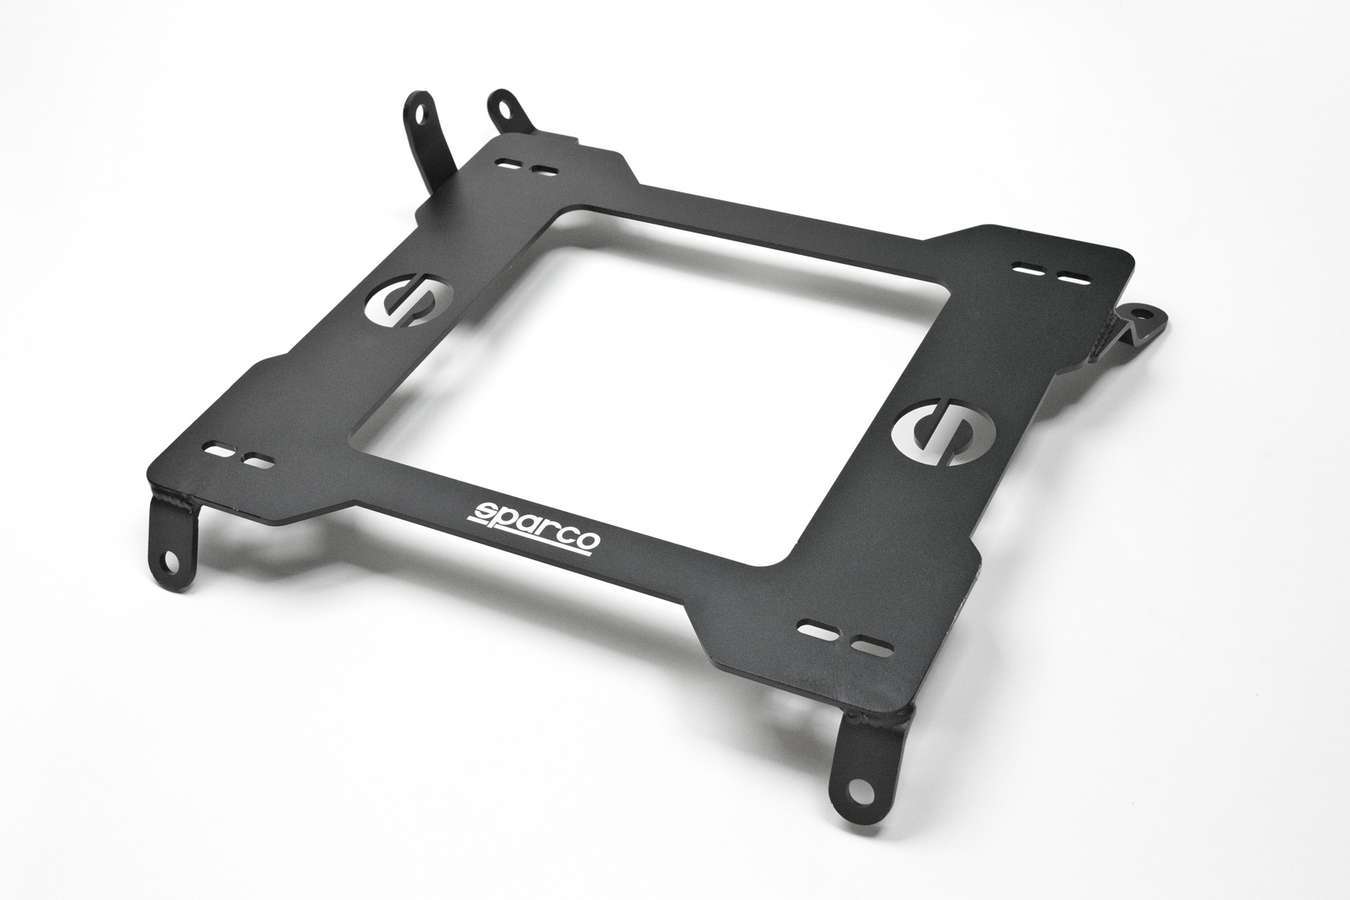 Sparco 600SB039L Seat Adapter Bracket, 600 Series, Sparco to Driver Side, Steel, Black Powder Coat, Ford Mustang 2005-14, Each